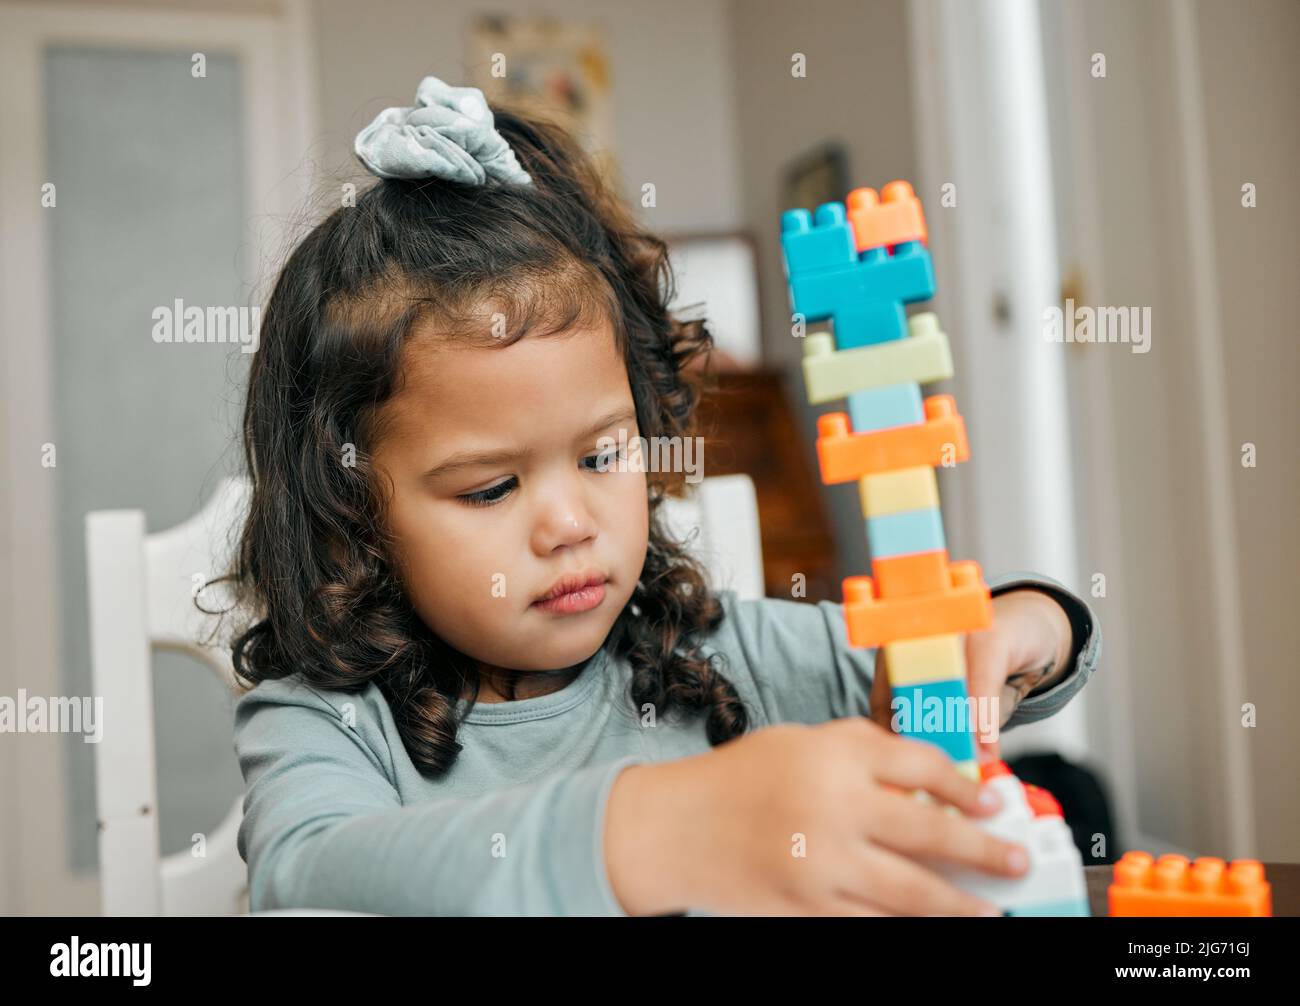 Really goos for hand and eye coordination. Shot of a cute little girl playing with building blocks at the kitchen table. Stock Photo